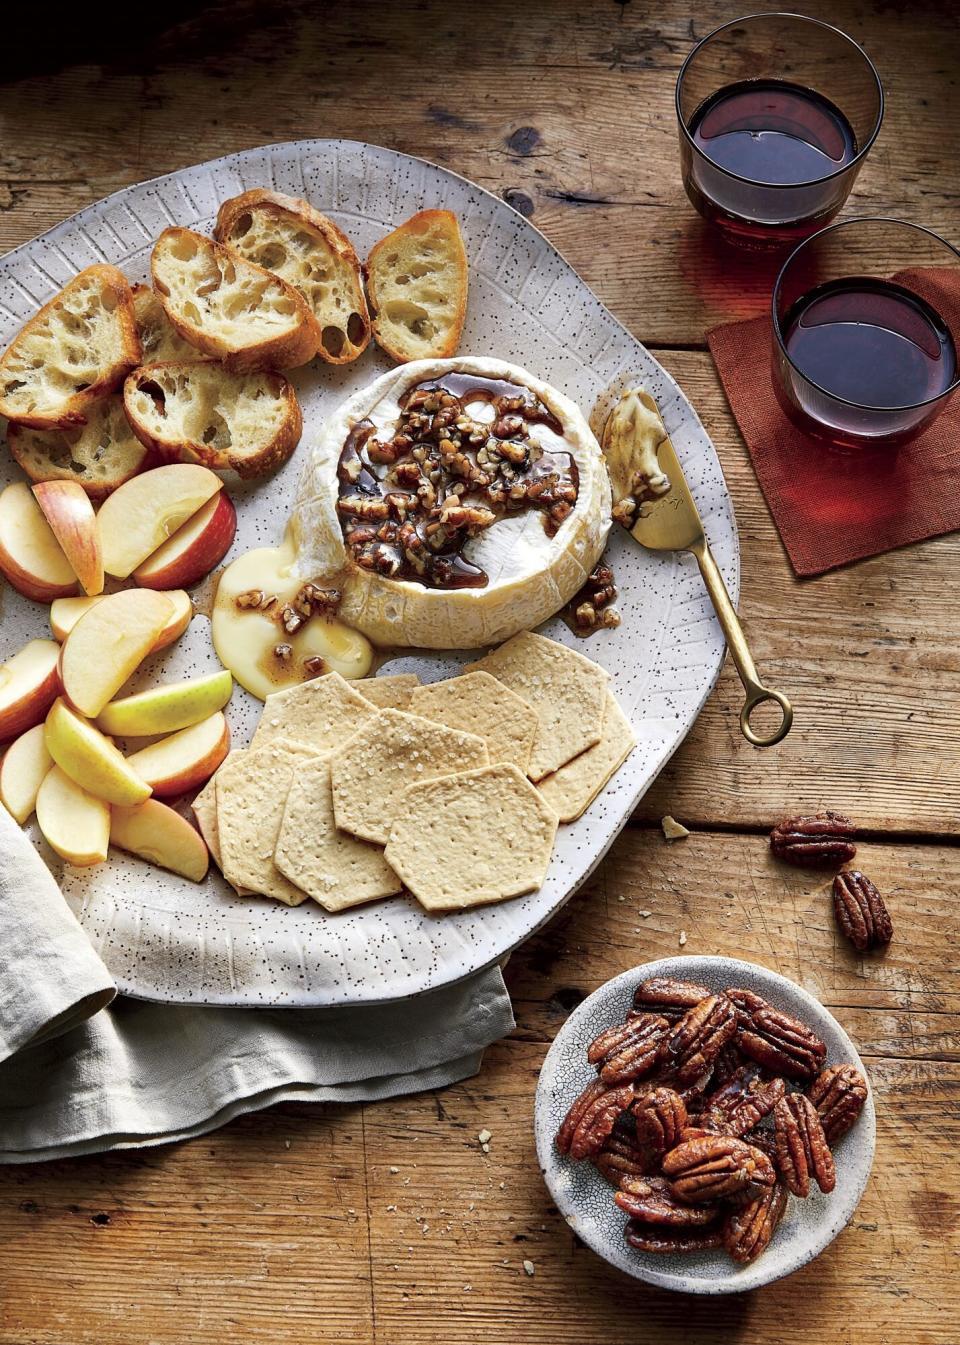 Baked Brie with Pecans